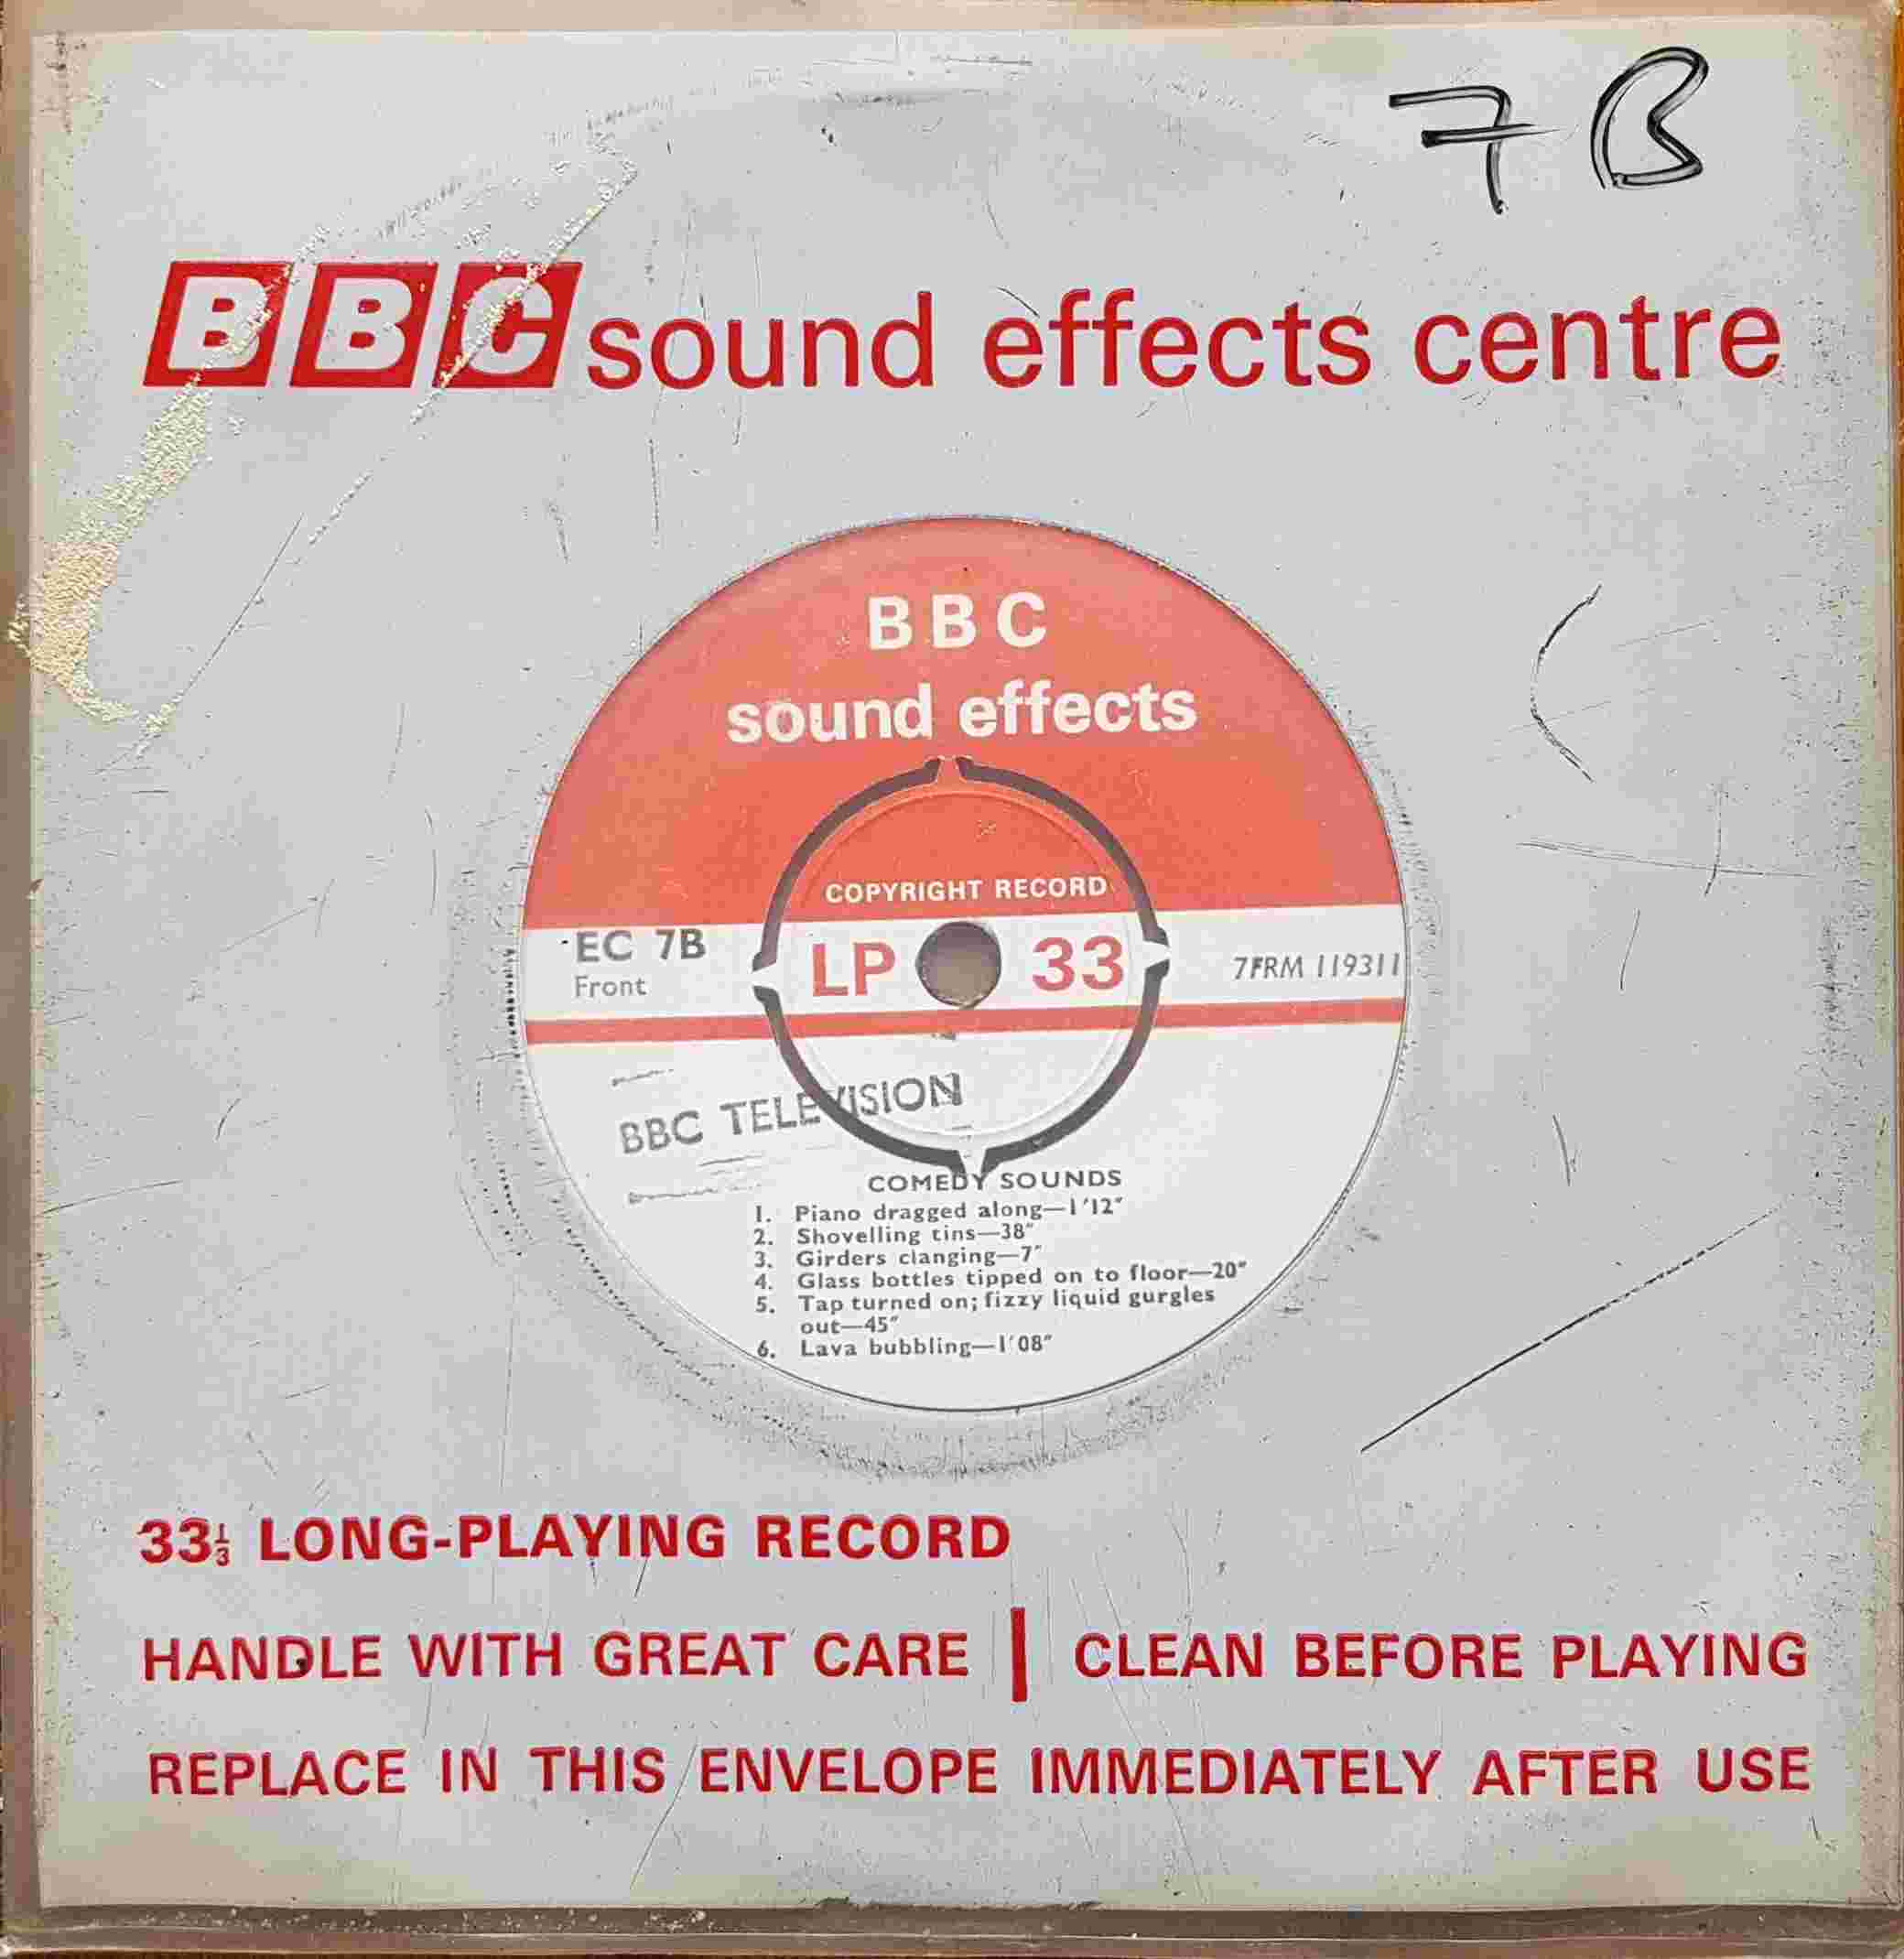 Picture of EC 7B Comedy sounds by artist Not registered from the BBC singles - Records and Tapes library